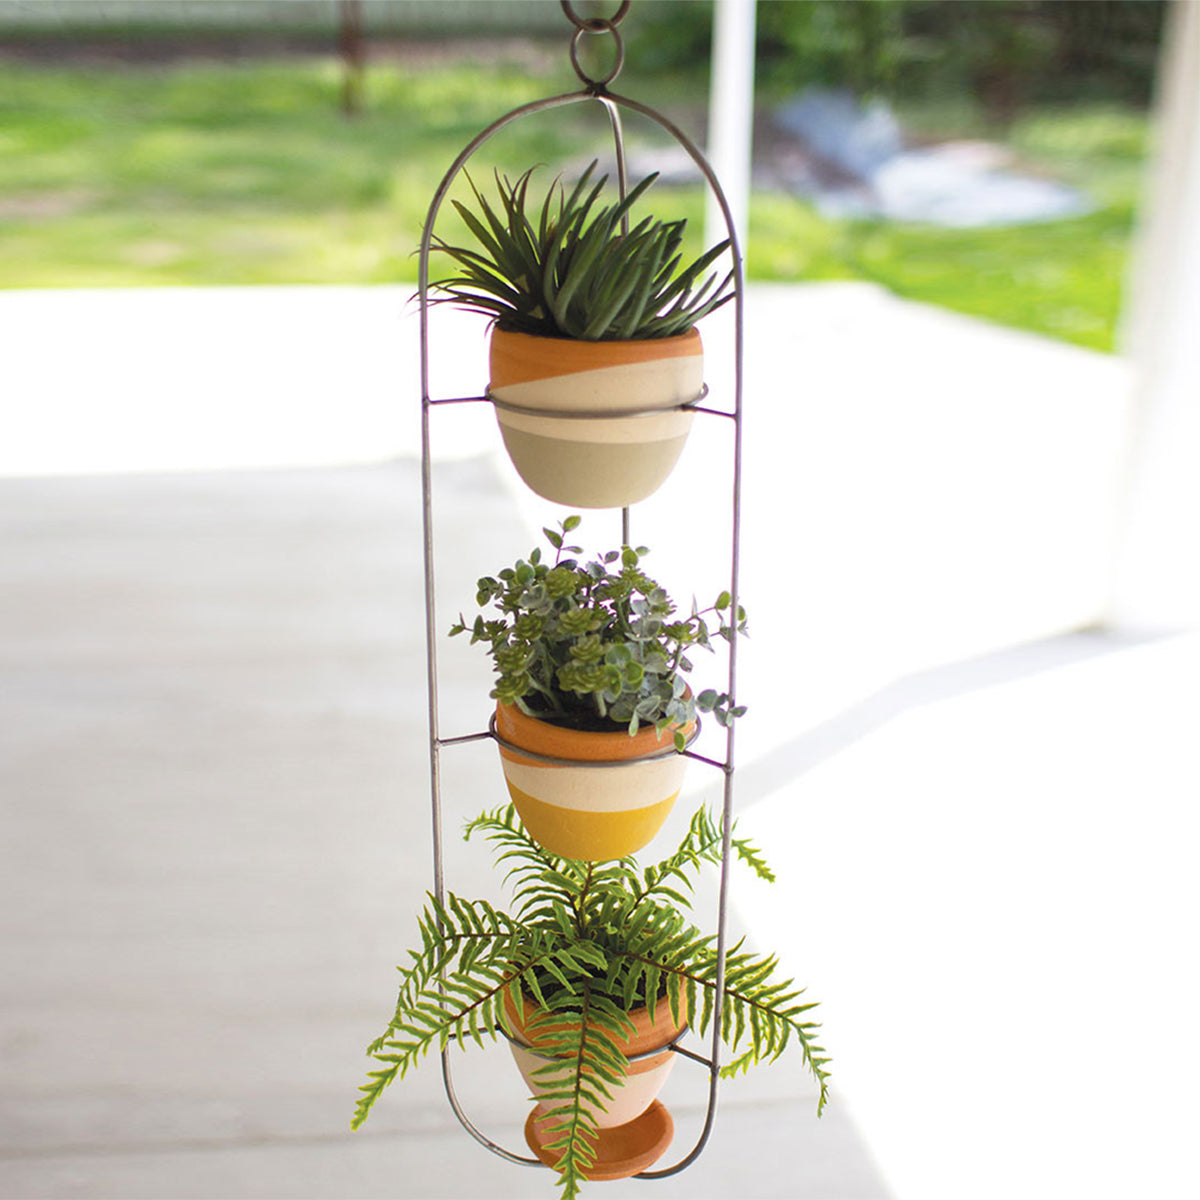 Hanging Clay Bowl Planters